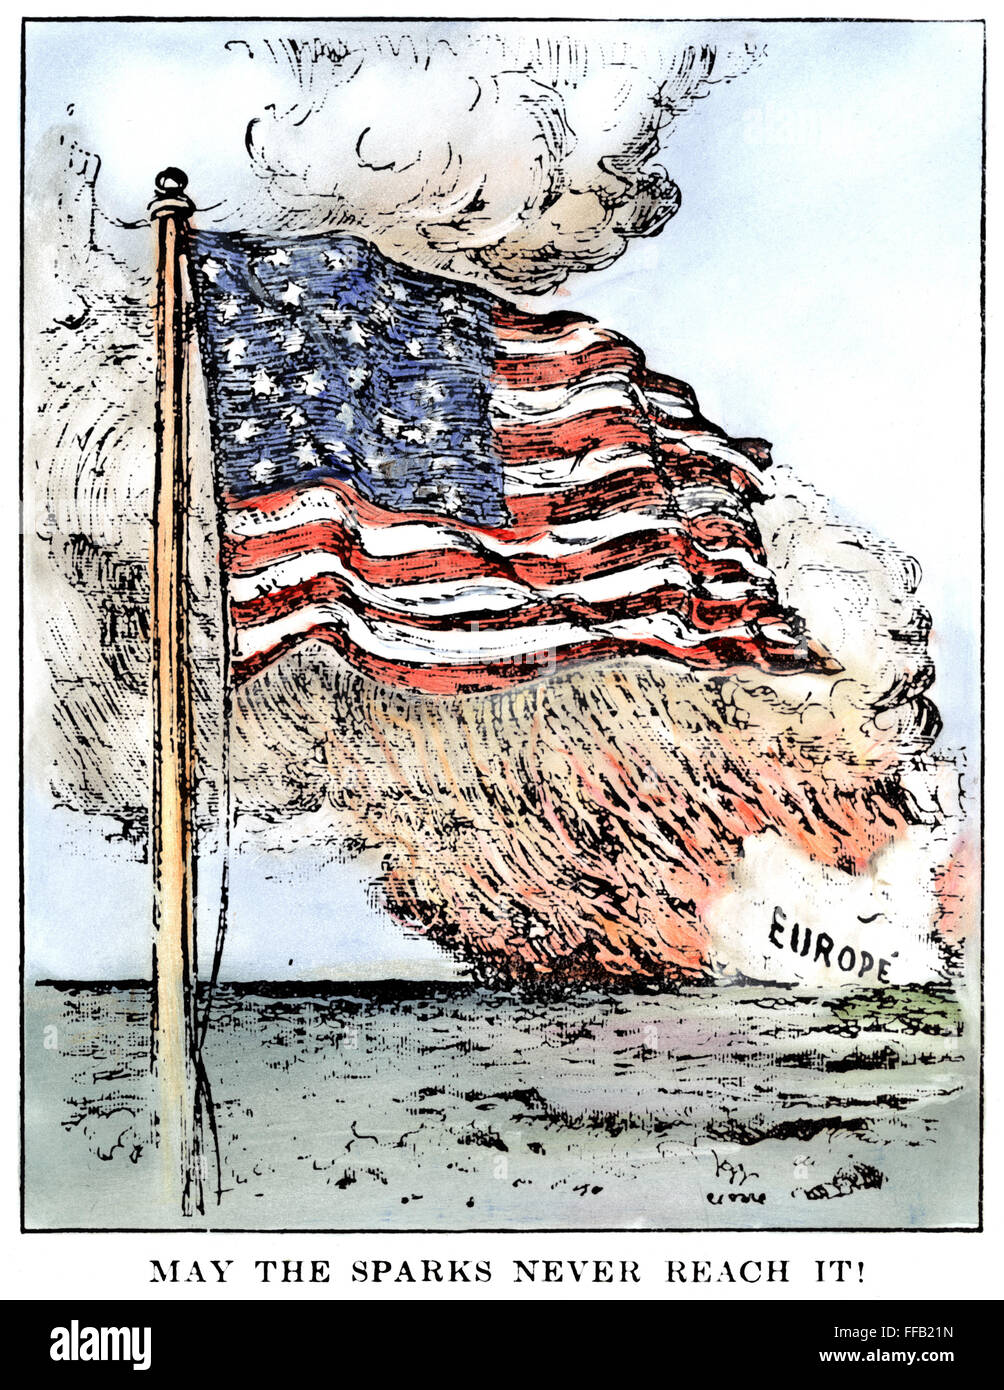 WORLD WAR I CARTOON, c1915. /n'May the Sparks Never Reach It!'. Cartoon by Oscar Cesare from The Sun newspaper from New York, c1915, expressing hope that the United States could avoid participating in the conflict then raging in Europe. Stock Photo